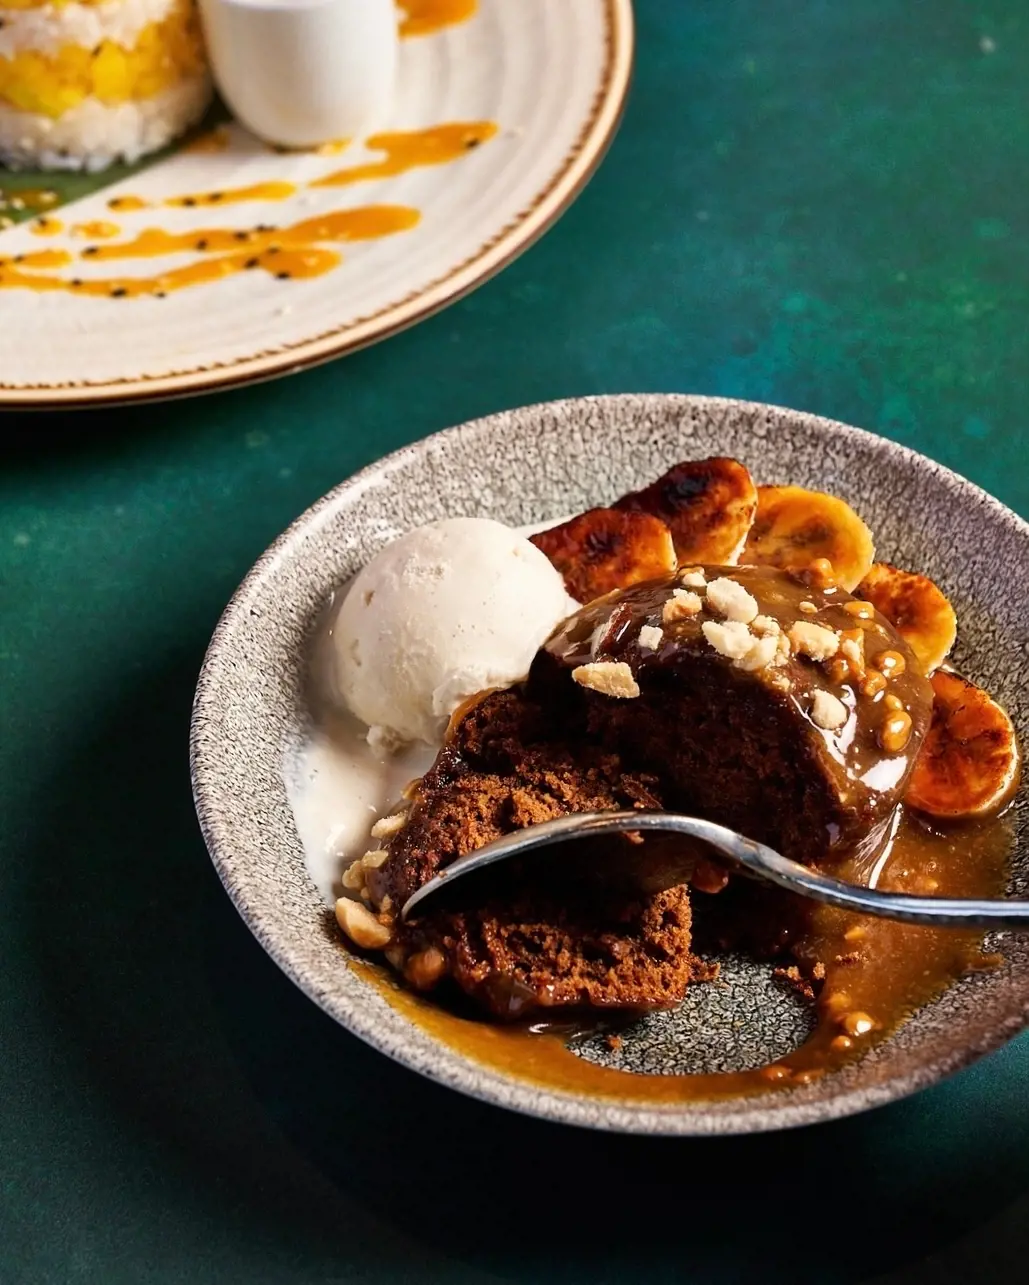 Banana and Peanut Sticky Toffee Pudding